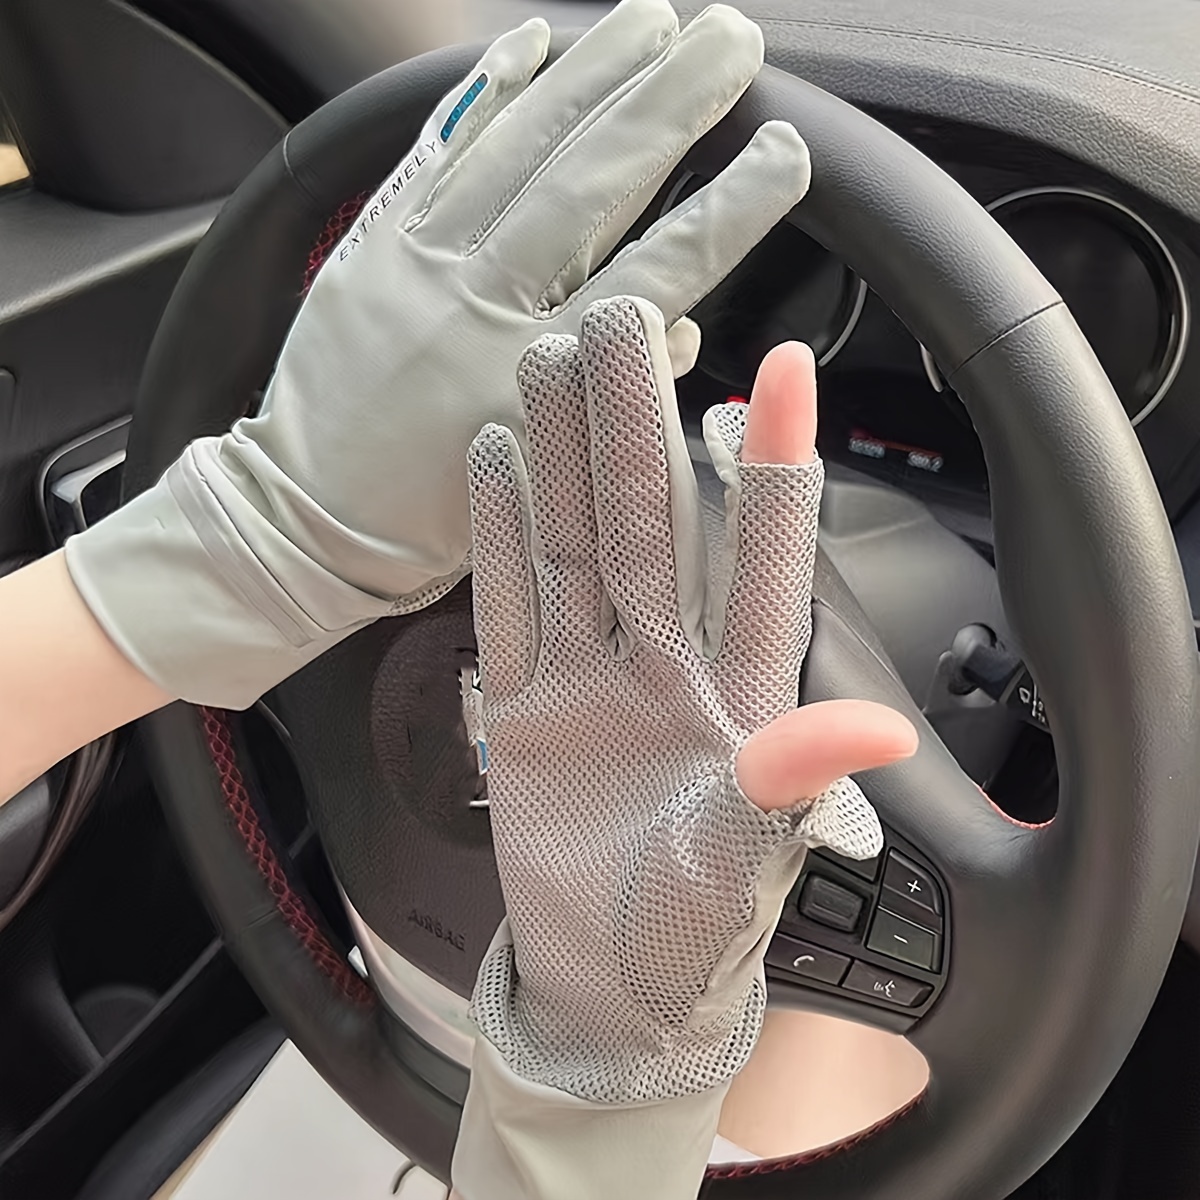 

Men's Summer Uv Protection Thin Short Viscose Gloves For Sun Protection, Breathable And Cool Feeling For Outdoor Activities Like Driving And Cycling